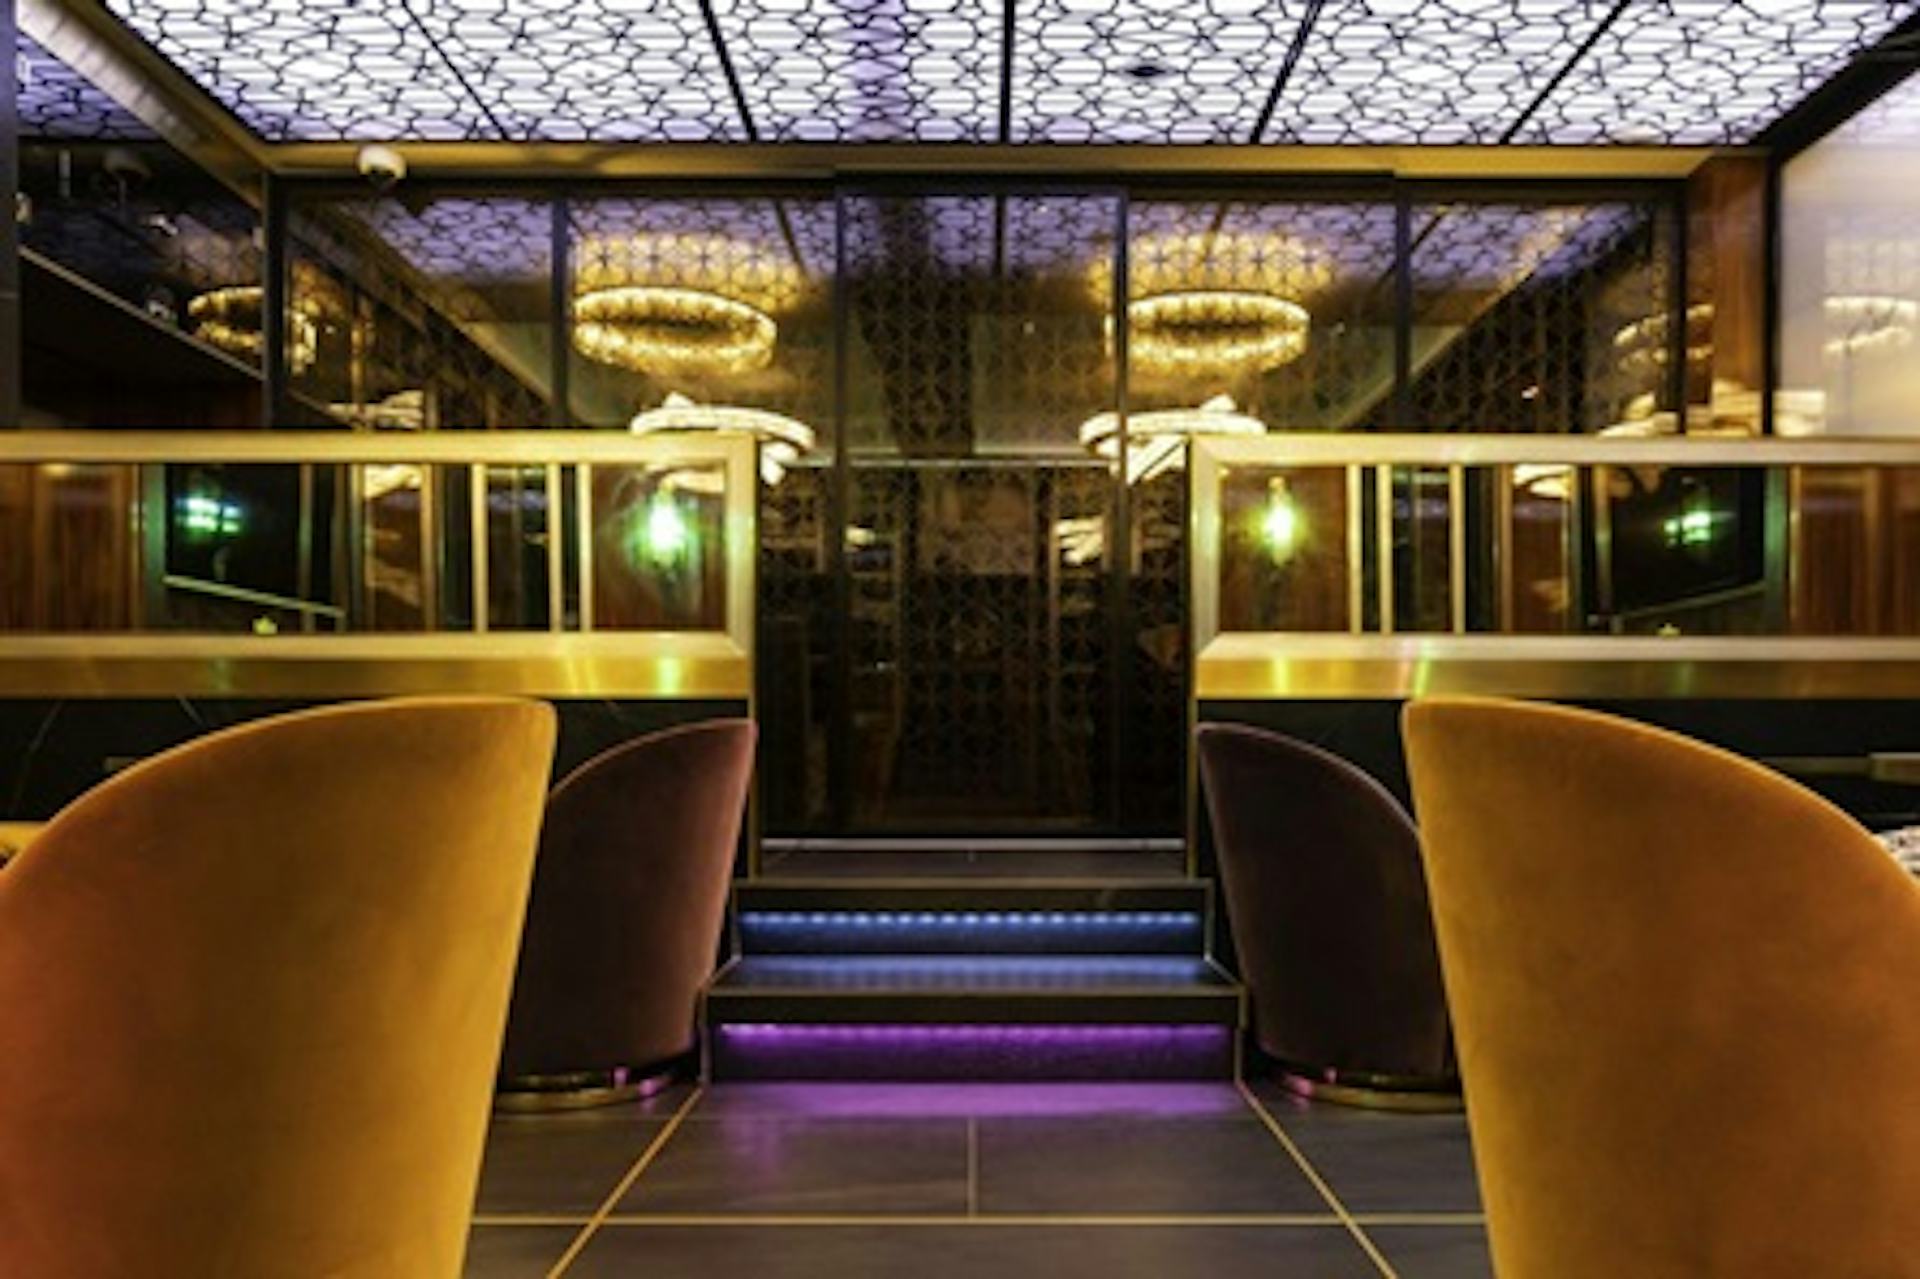 Champagne and Caviar for Two at Arc Le Salon, Mayfair